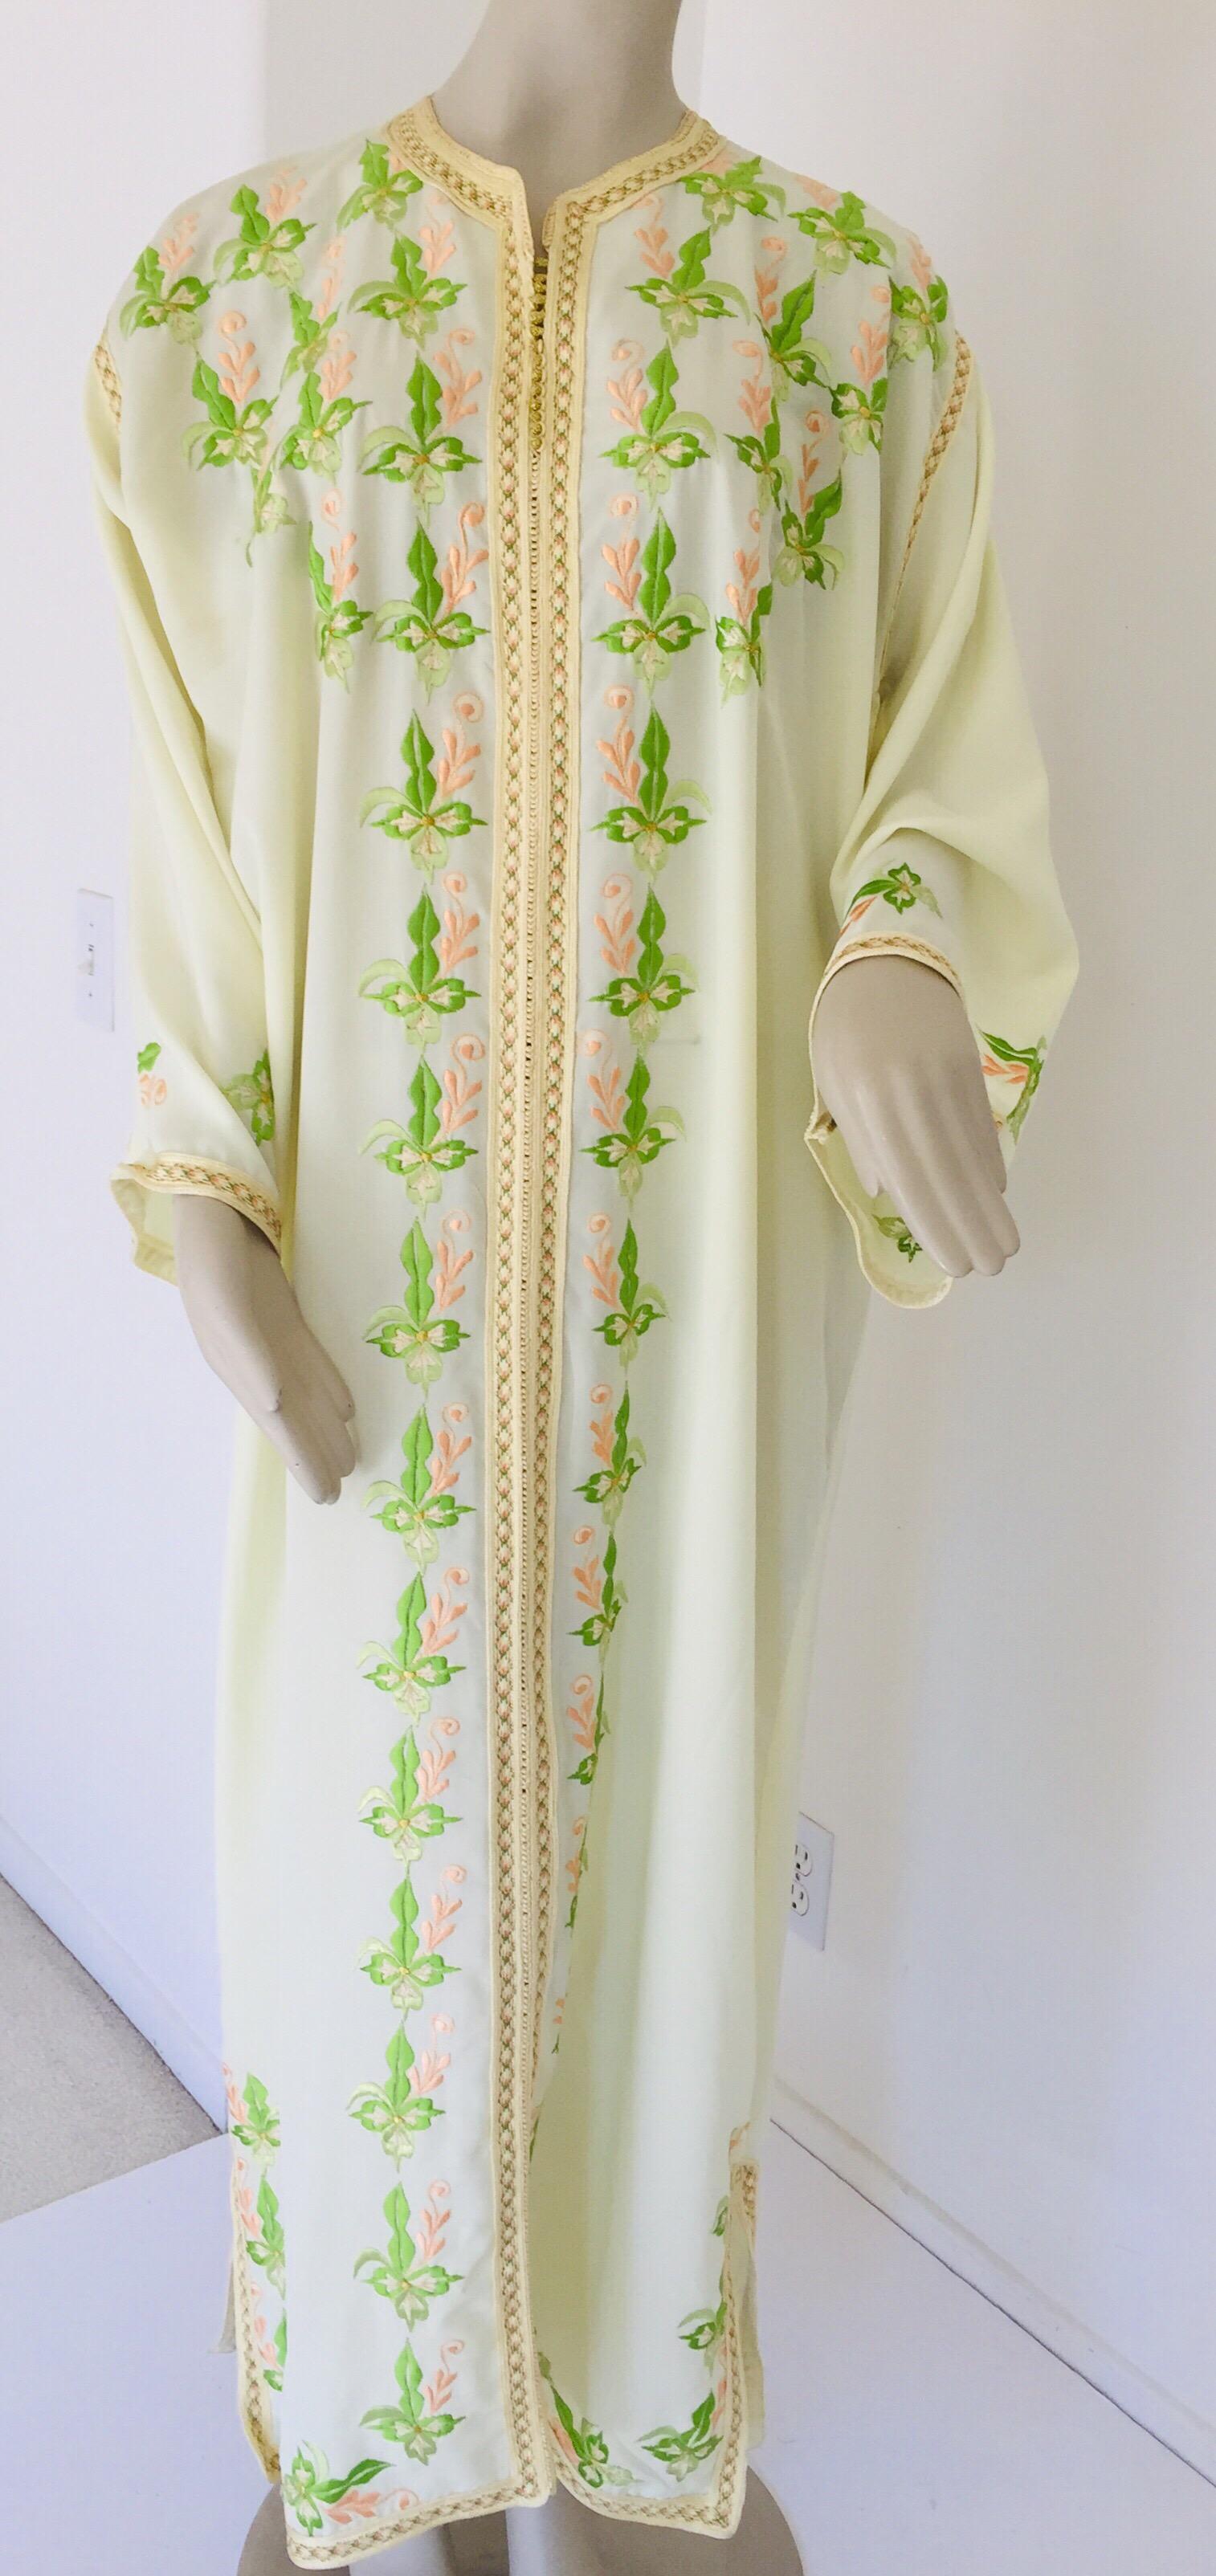 Elegant Moroccan caftan with trim embroidered, yellow, green, pink gold.
This light summery caftan is crafted in Morocco and tailored for a relaxed fit, features a traditional neckline, embellished sleeves and vented sides.
This long maxi dress